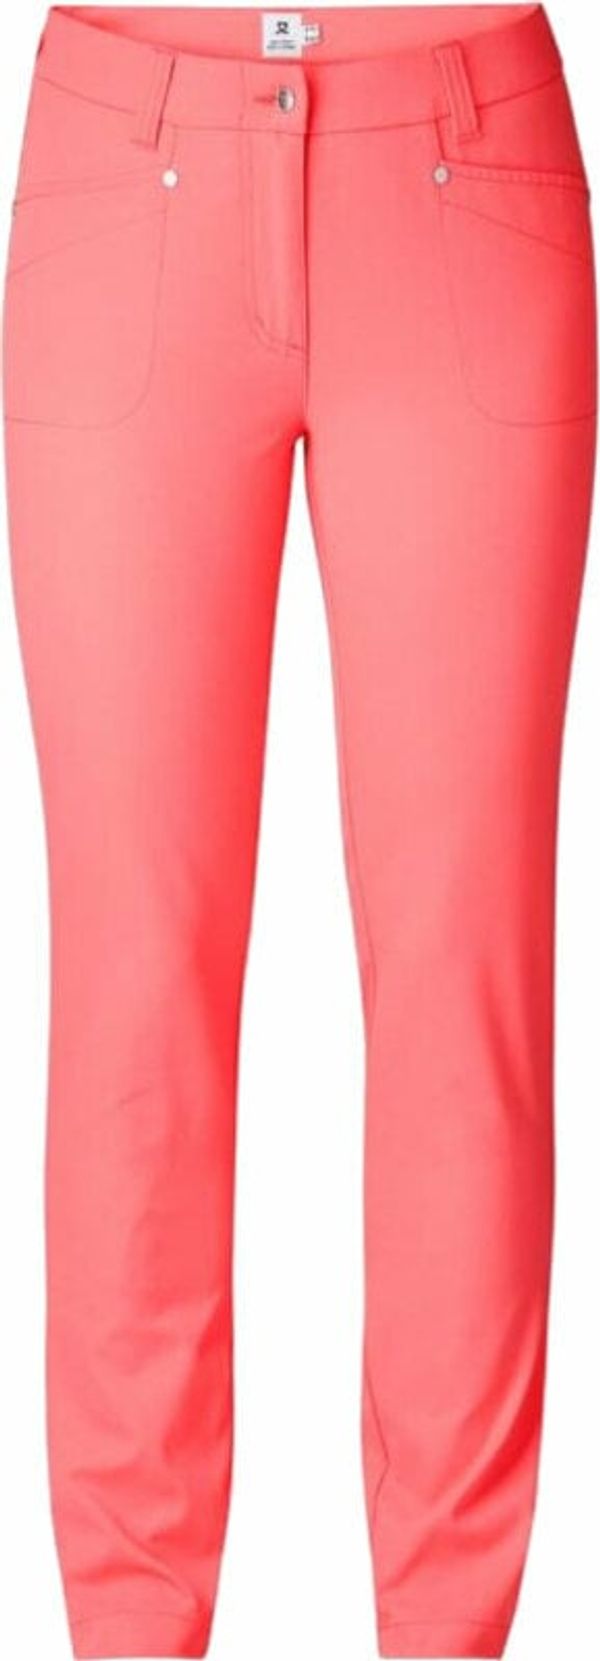 Daily Sports Daily Sports Lyric Pants 29" Coral 44